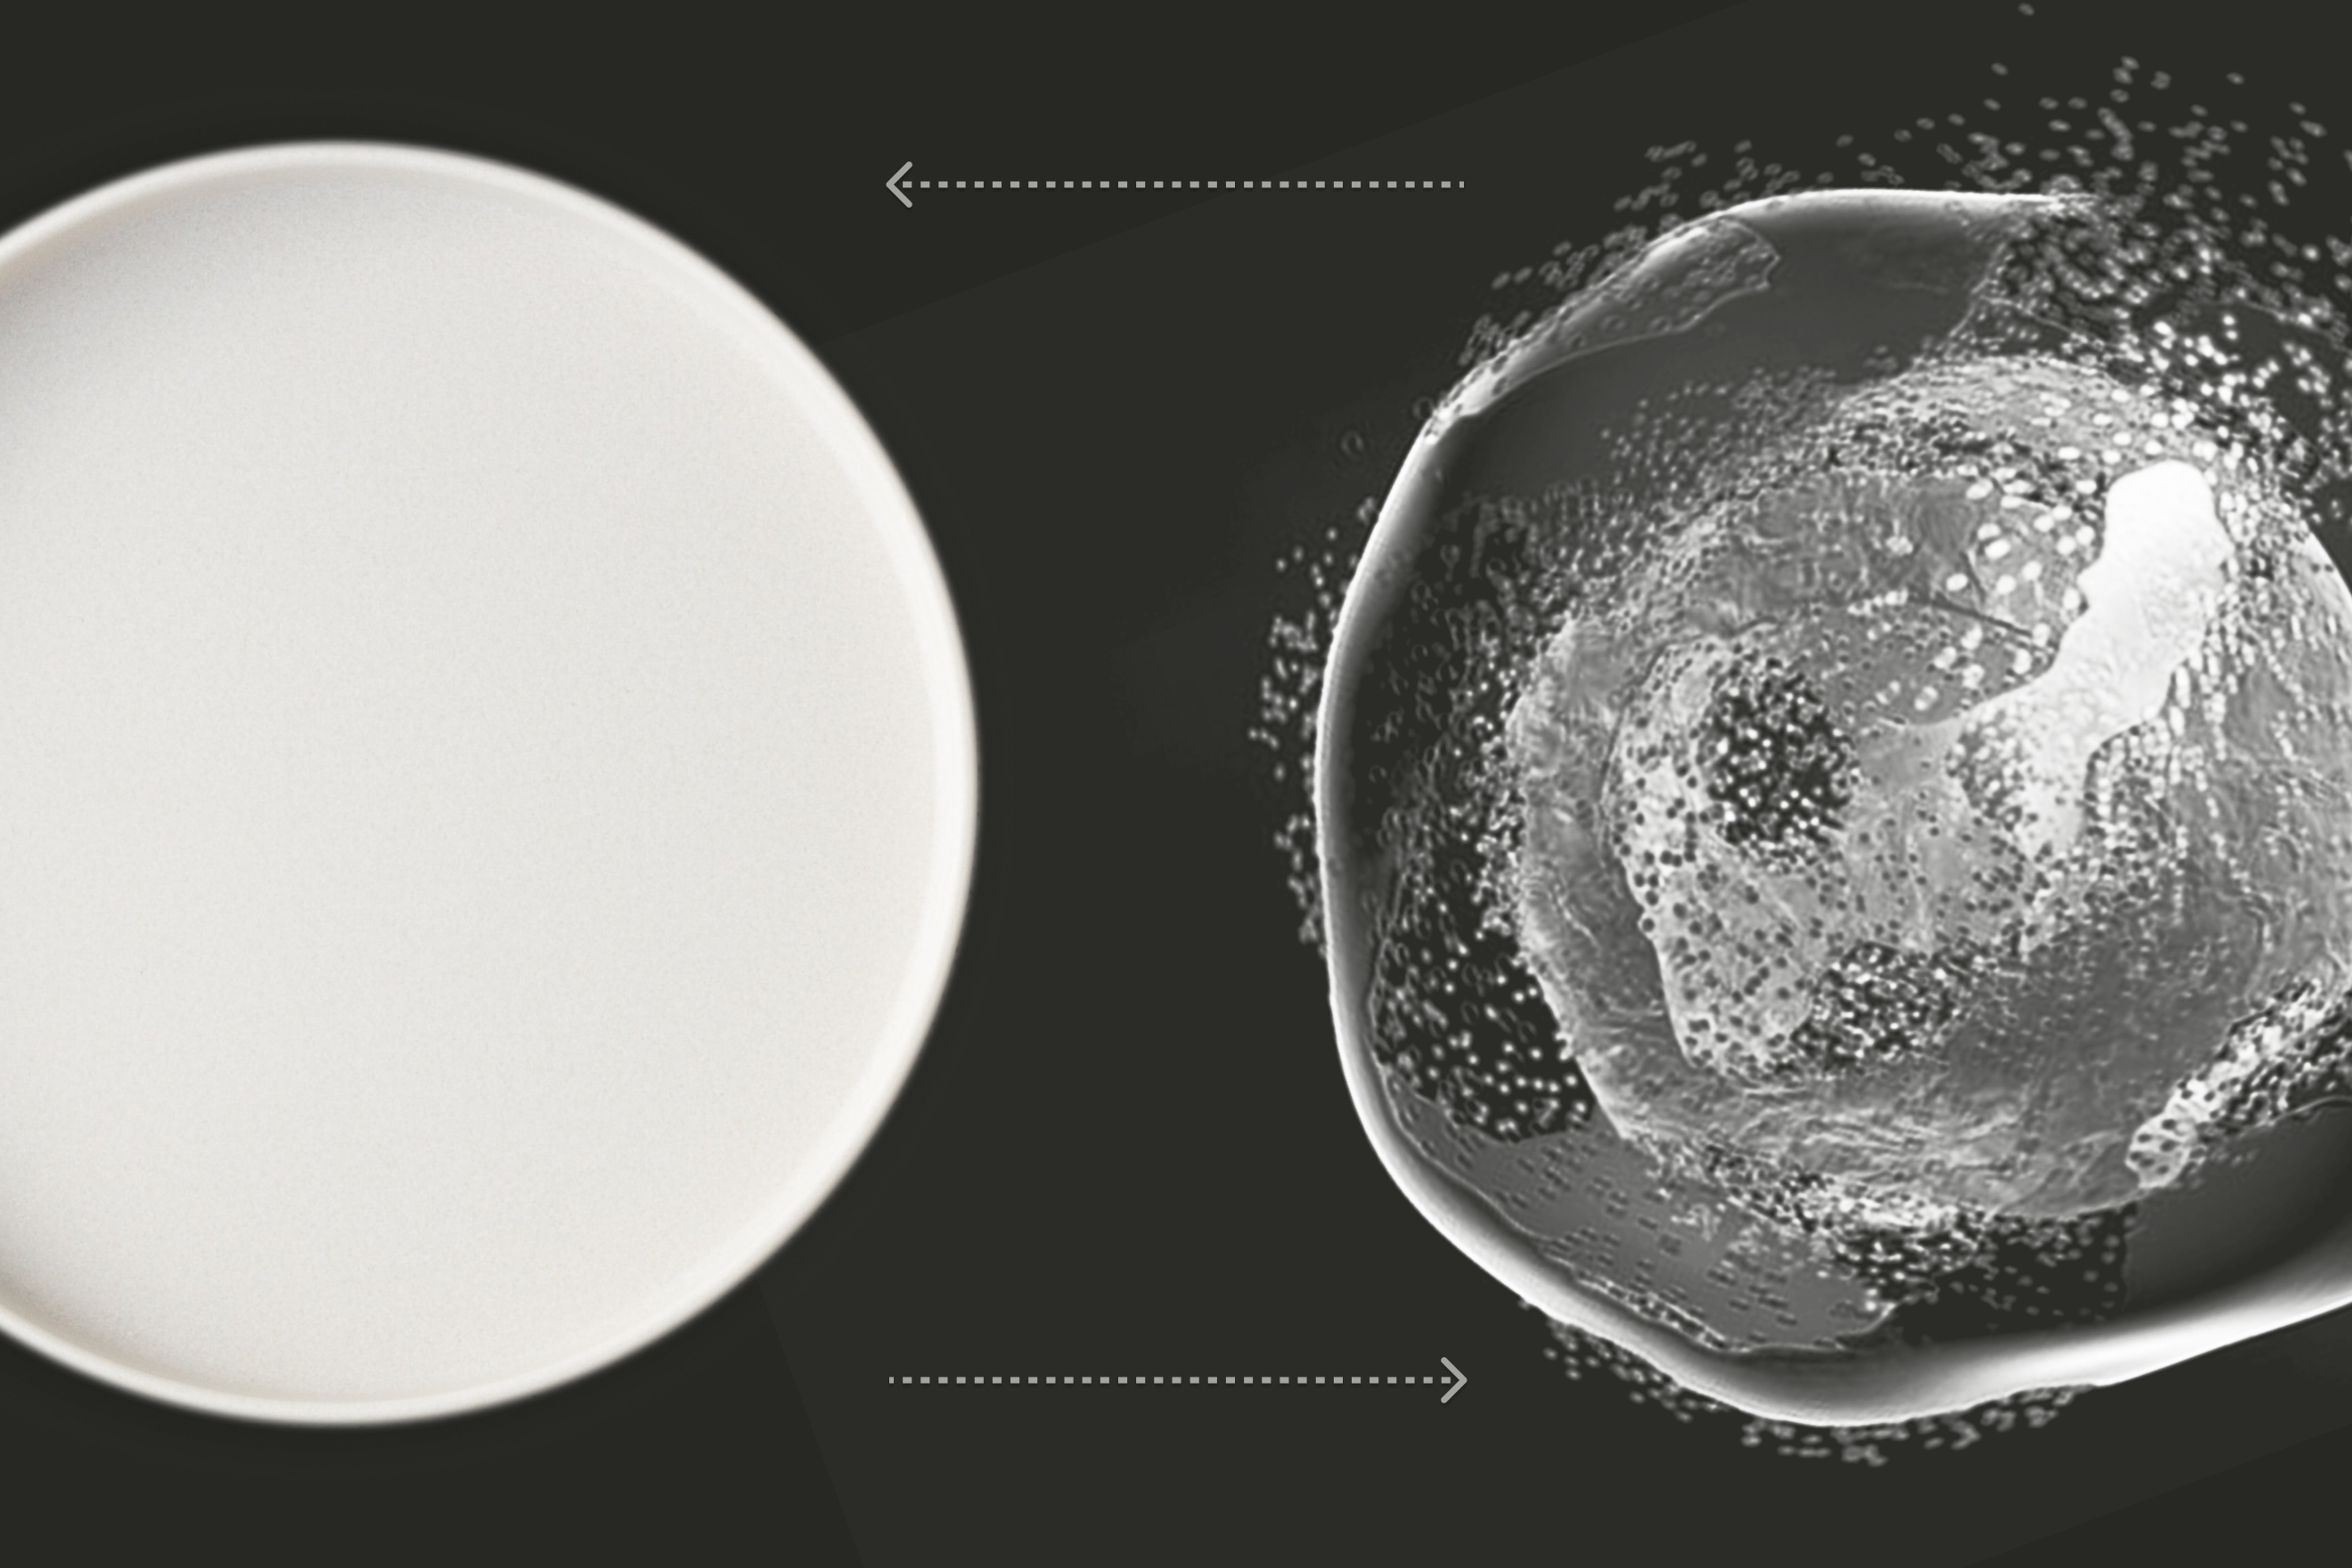 Empty plate and autophagy